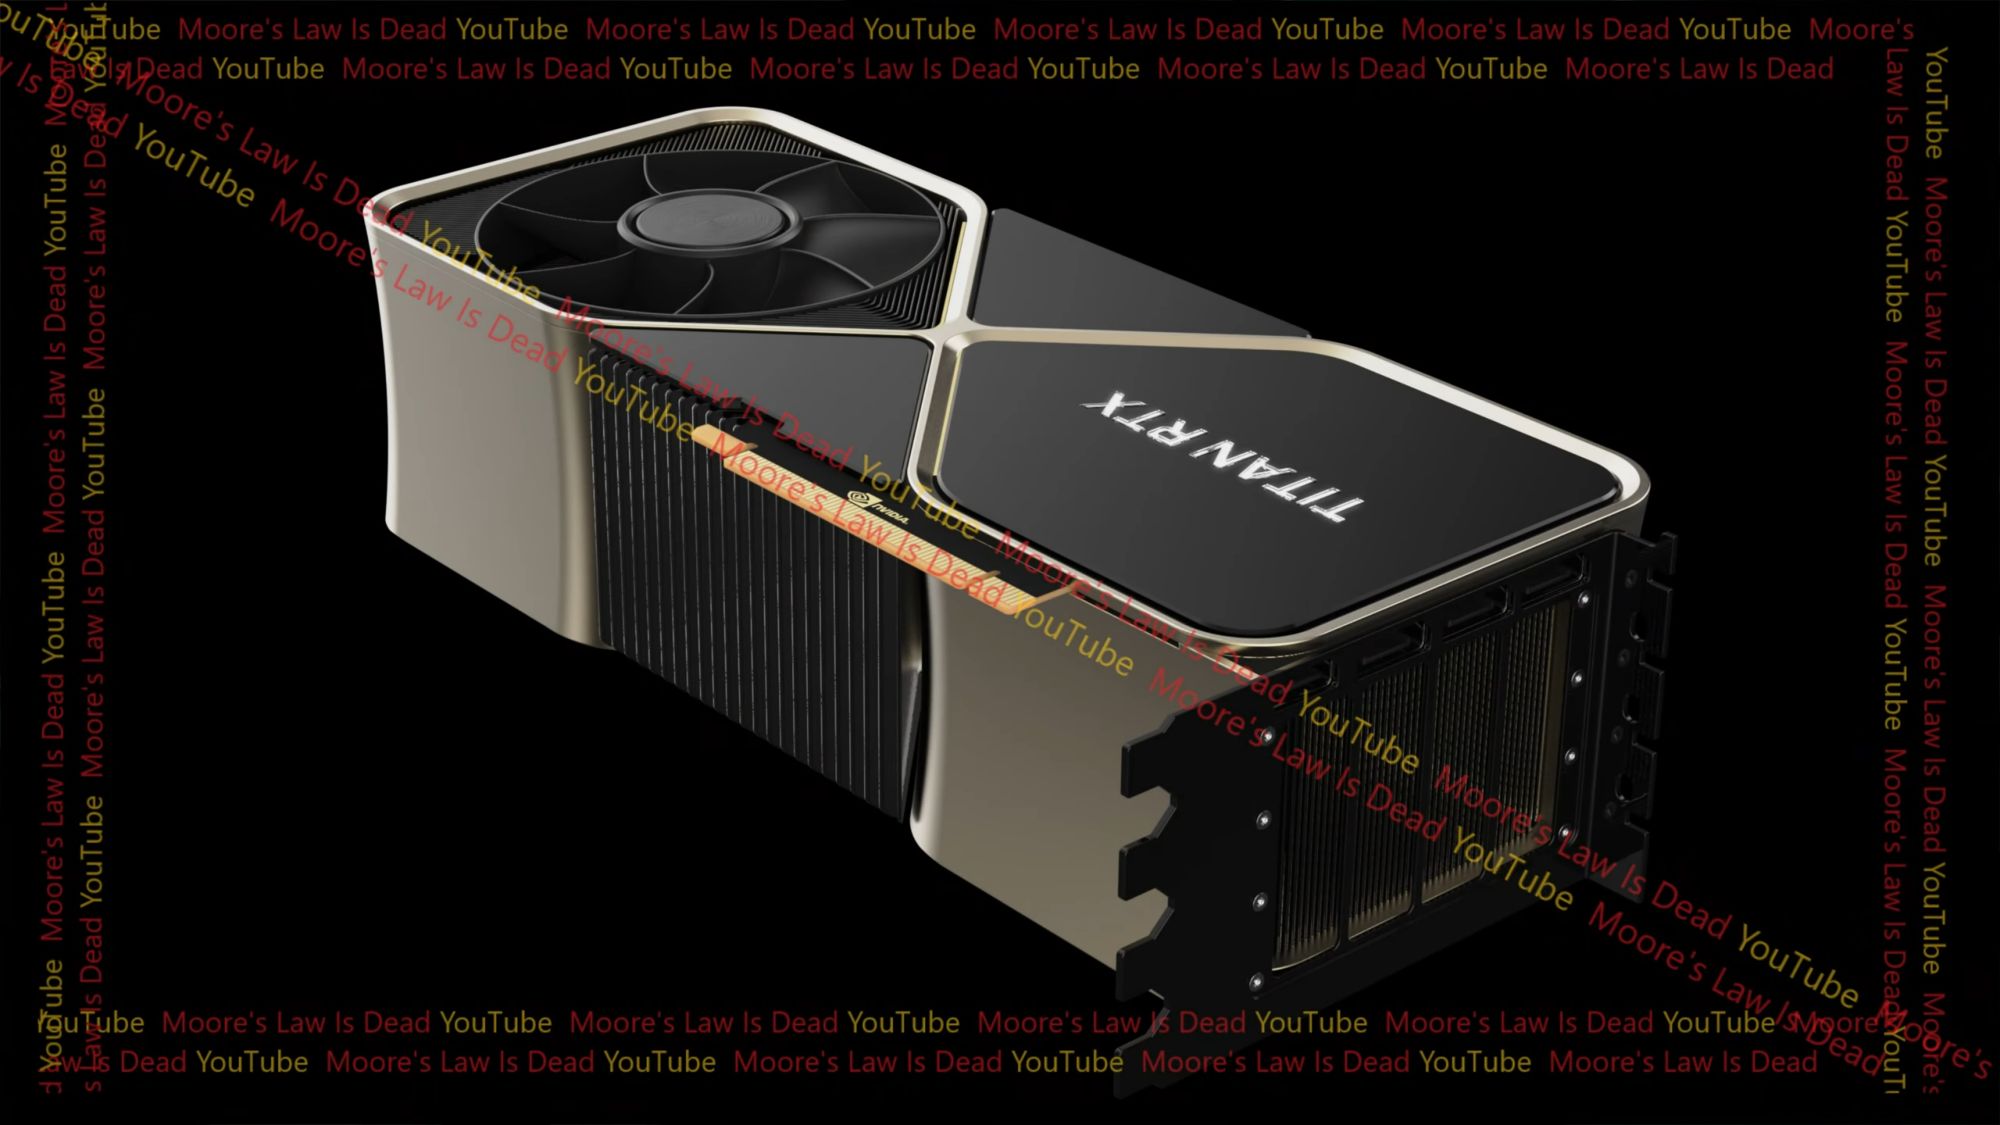 The GPUs Released So Far In This Generation: GeForce RTX 40, Radeon RX 7000, Arc A-Series 27